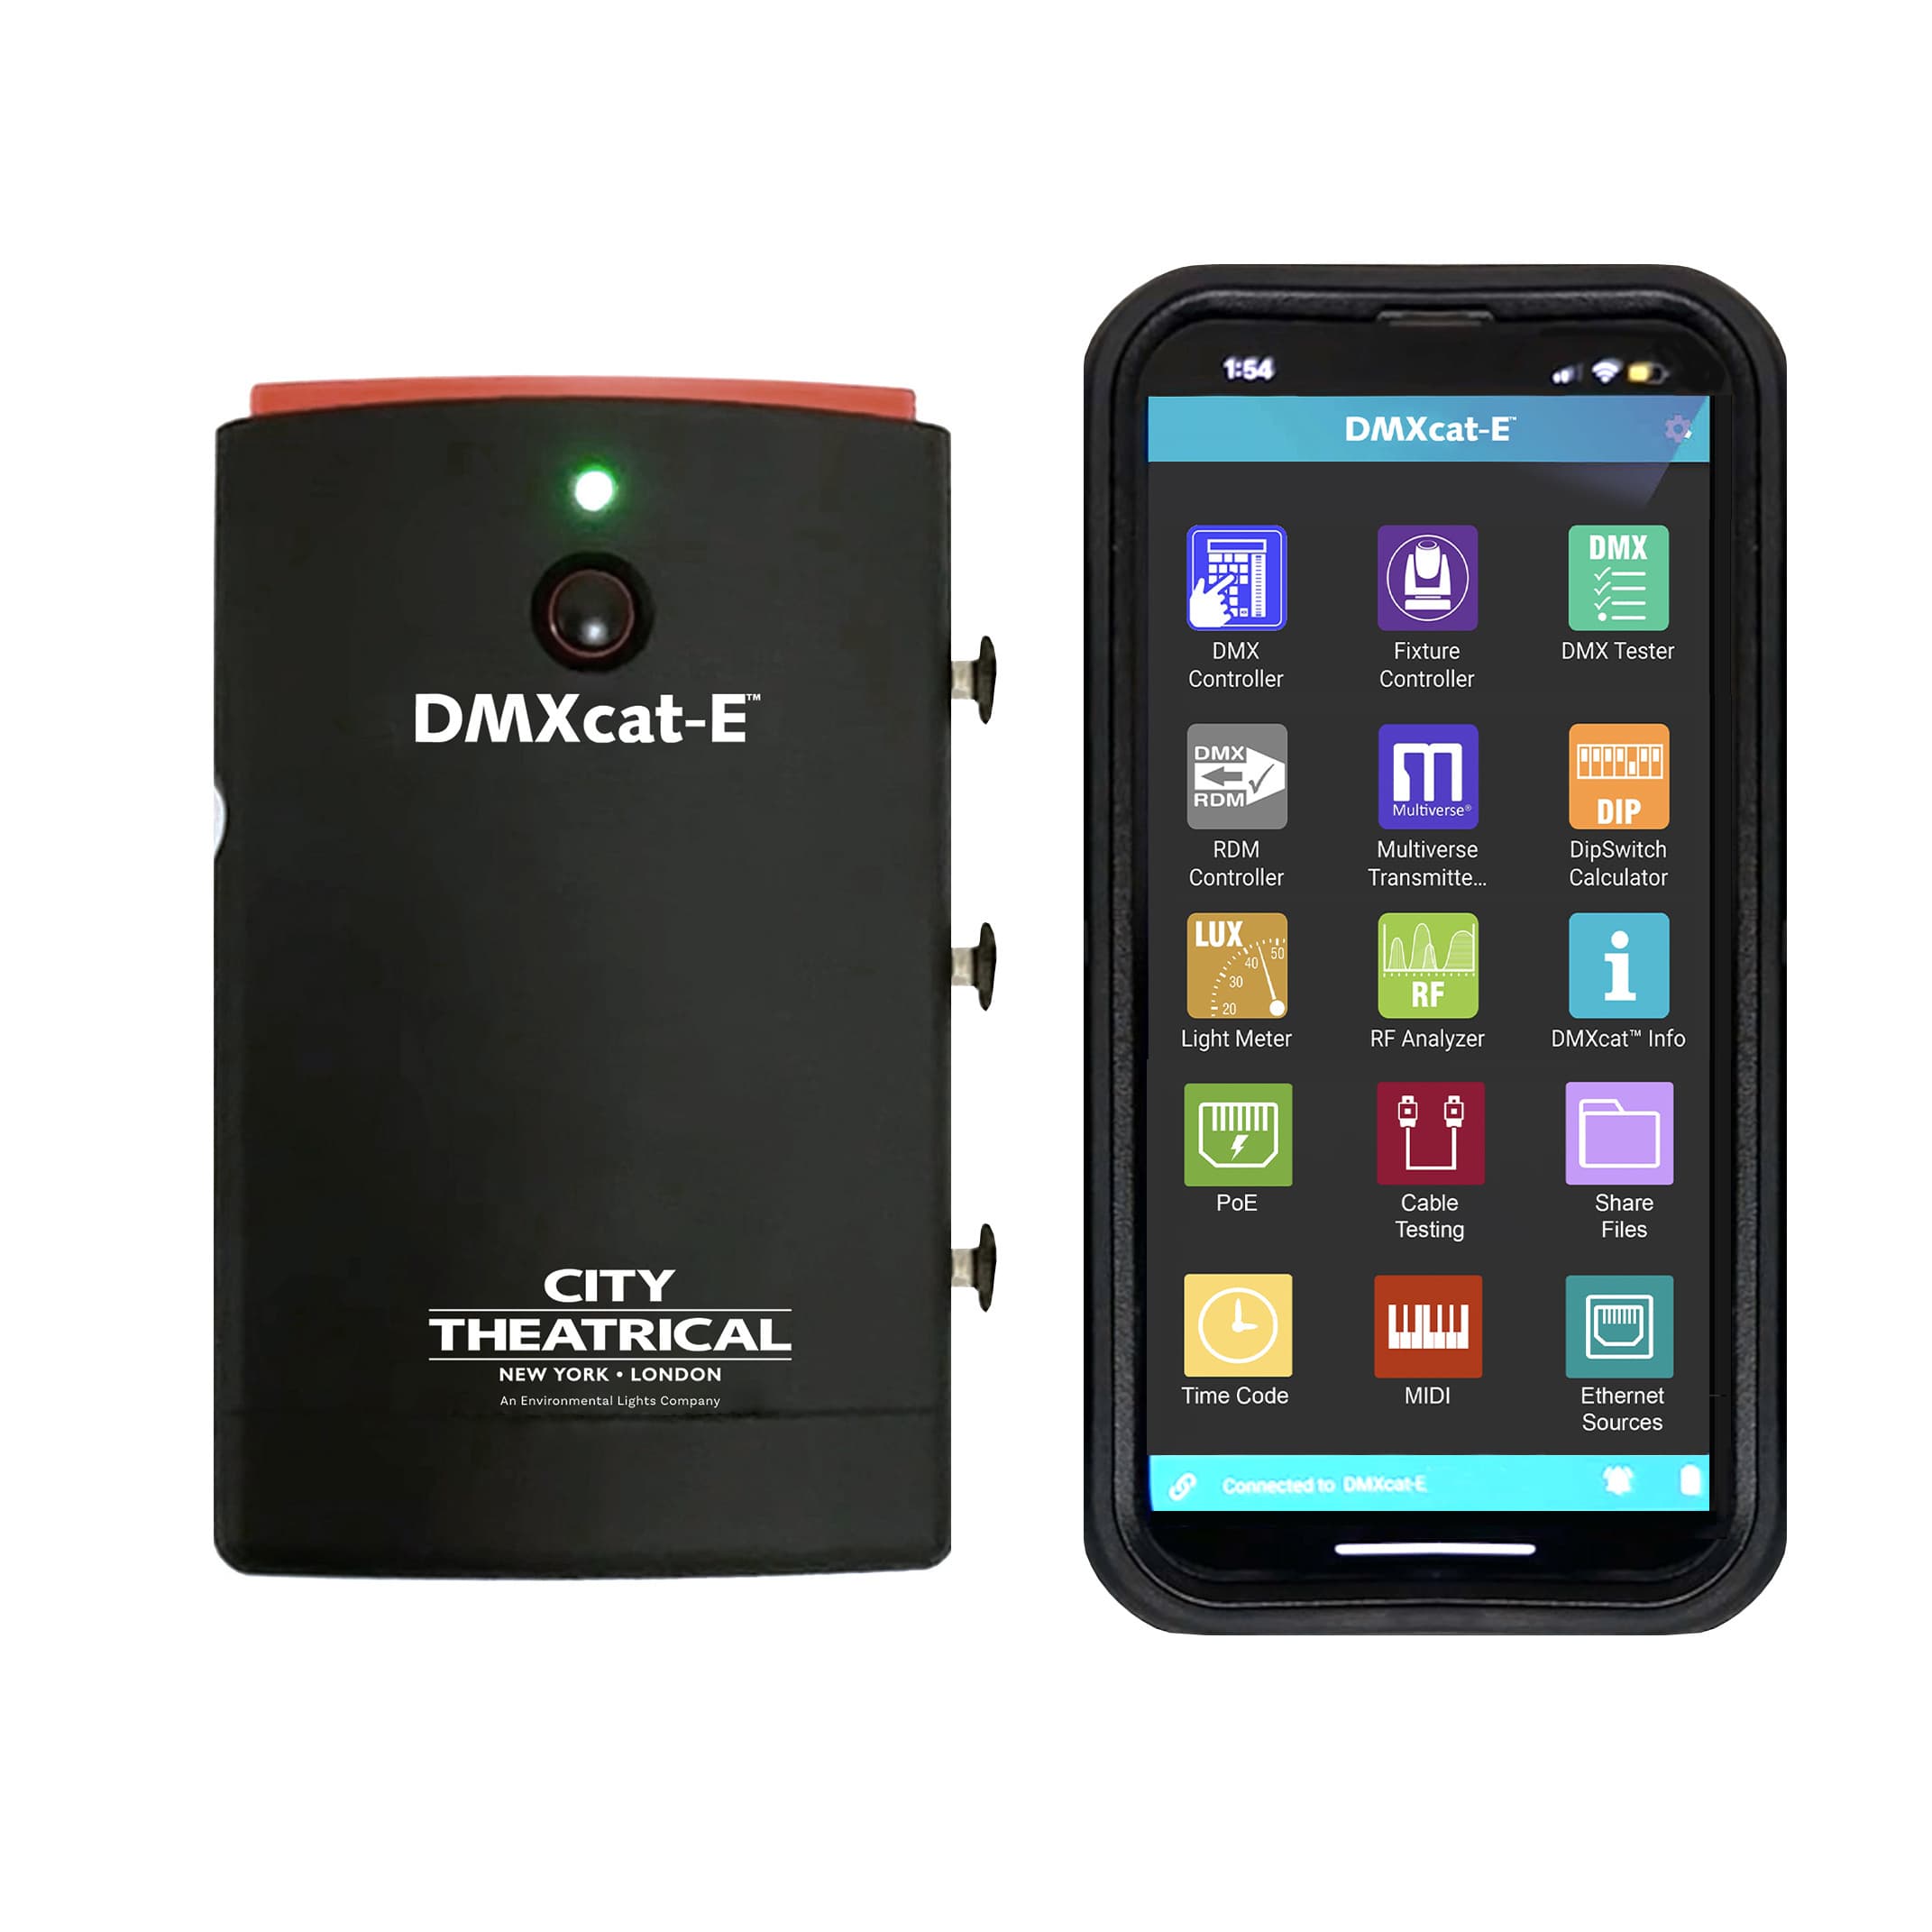 6100-dmxcat-e-hardware-and-smartphone-app-1-straight-view.jpg